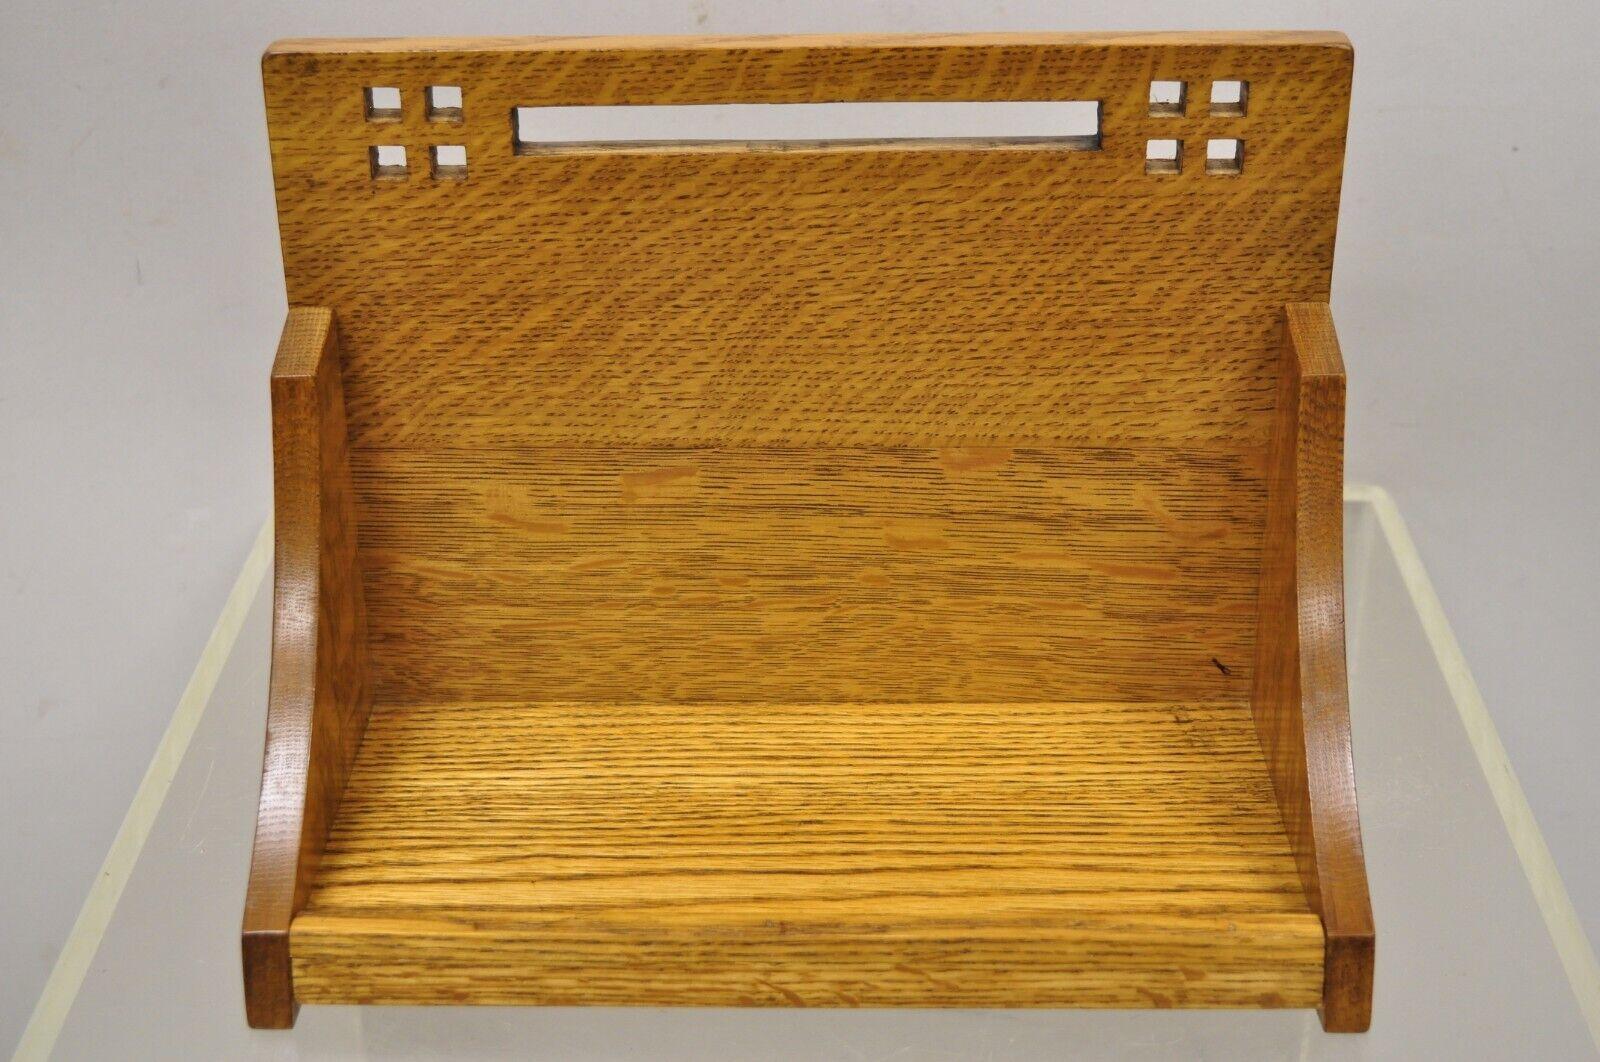 Bertucci & Winstanley Arts & Crafts Mission Oak Small Wall Shelf Rack. Item features solid wood construction, beautiful wood grain, nicely carved details, original stamp, quality American craftmanship. Circa Late 20th Century. Measurements: 8.5